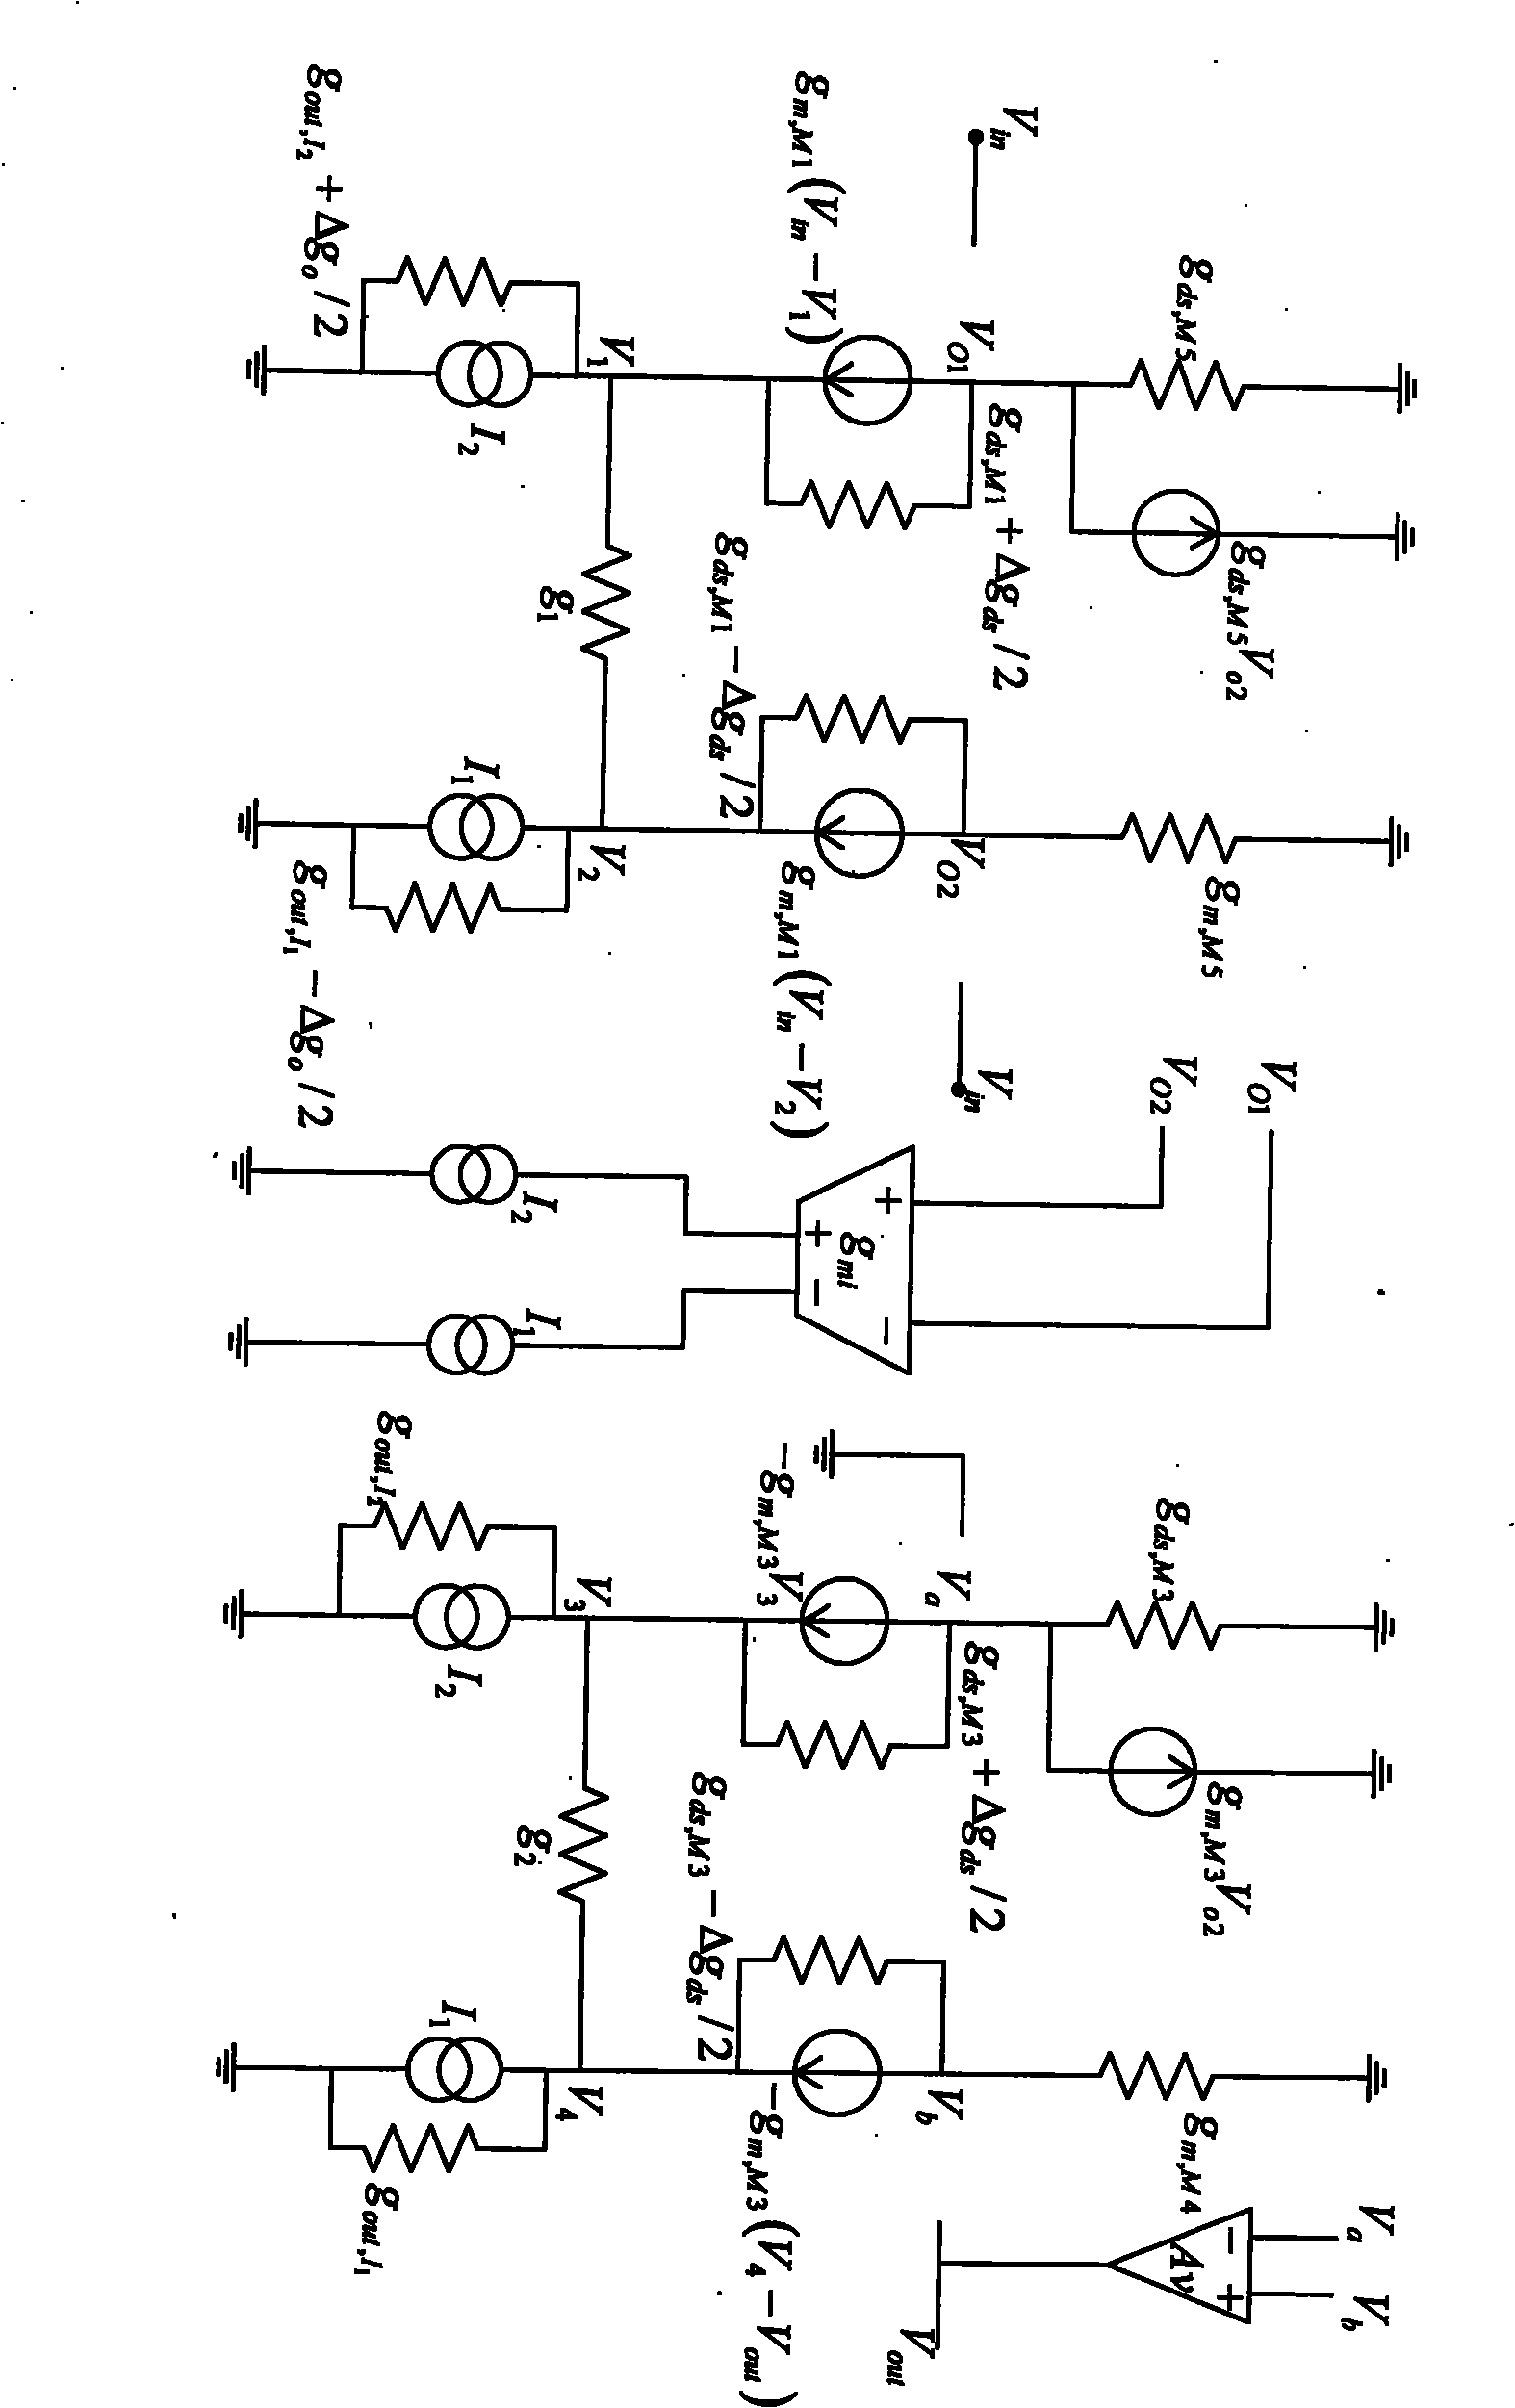 Front-end amplifier circuit based on magnetoelectric transducer made of relaxor ferroelectric material